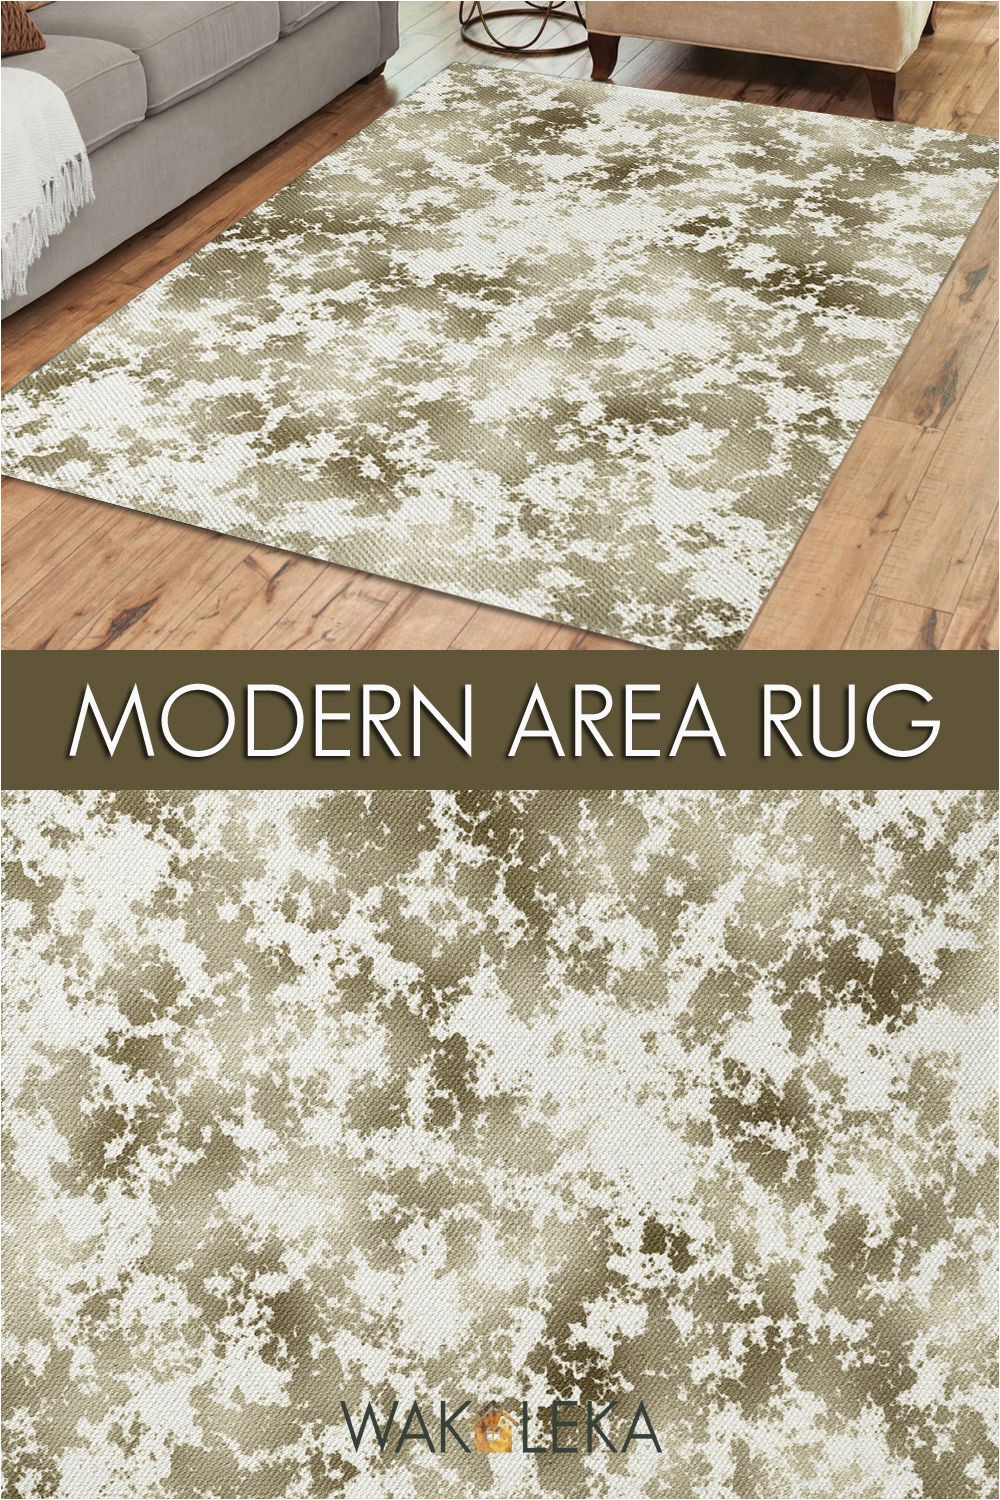 4×6 Non Skid area Rug A Textured Abstract Industrial Style area Rug In Three Sizes